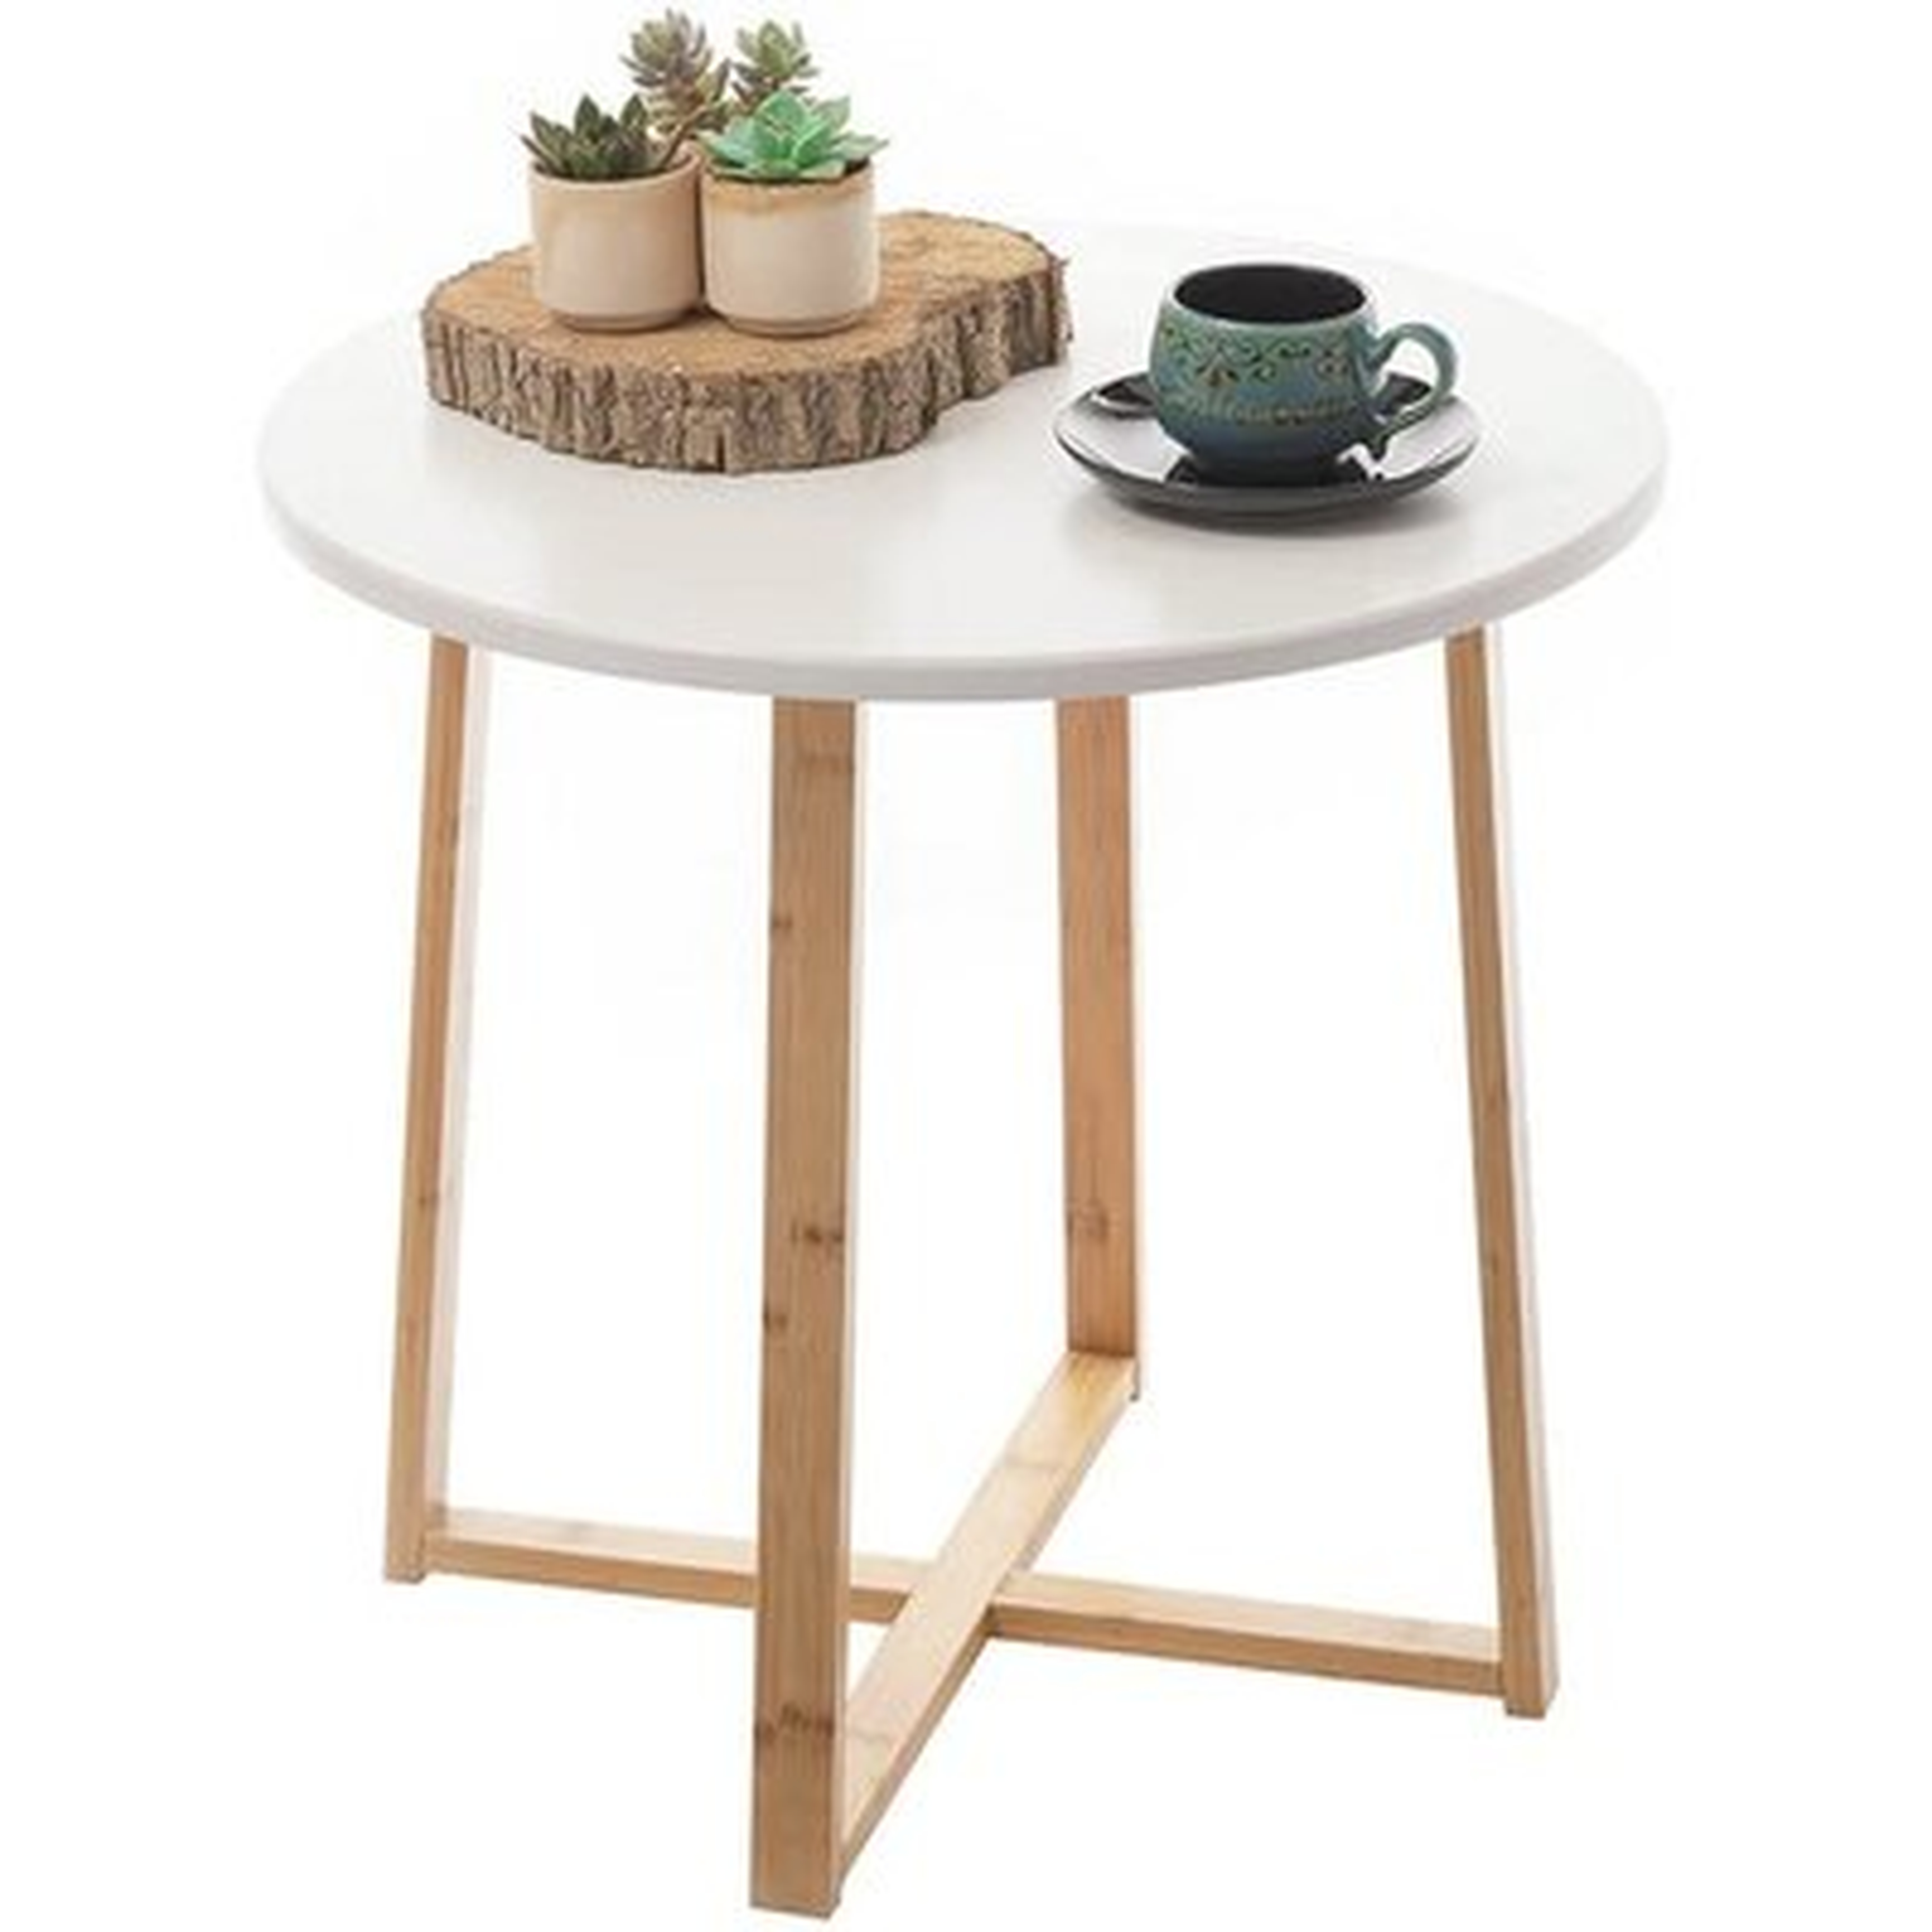 Small Coffee Side End Table For Bedside,Sofa,Entryway Tables Easy To Flod  For Living Room,Durable Plant Nightstand Stands And Mini Accent Night Table,Boho Nightstand Burlywood Desk For Home And Outdoor Kids - Wayfair